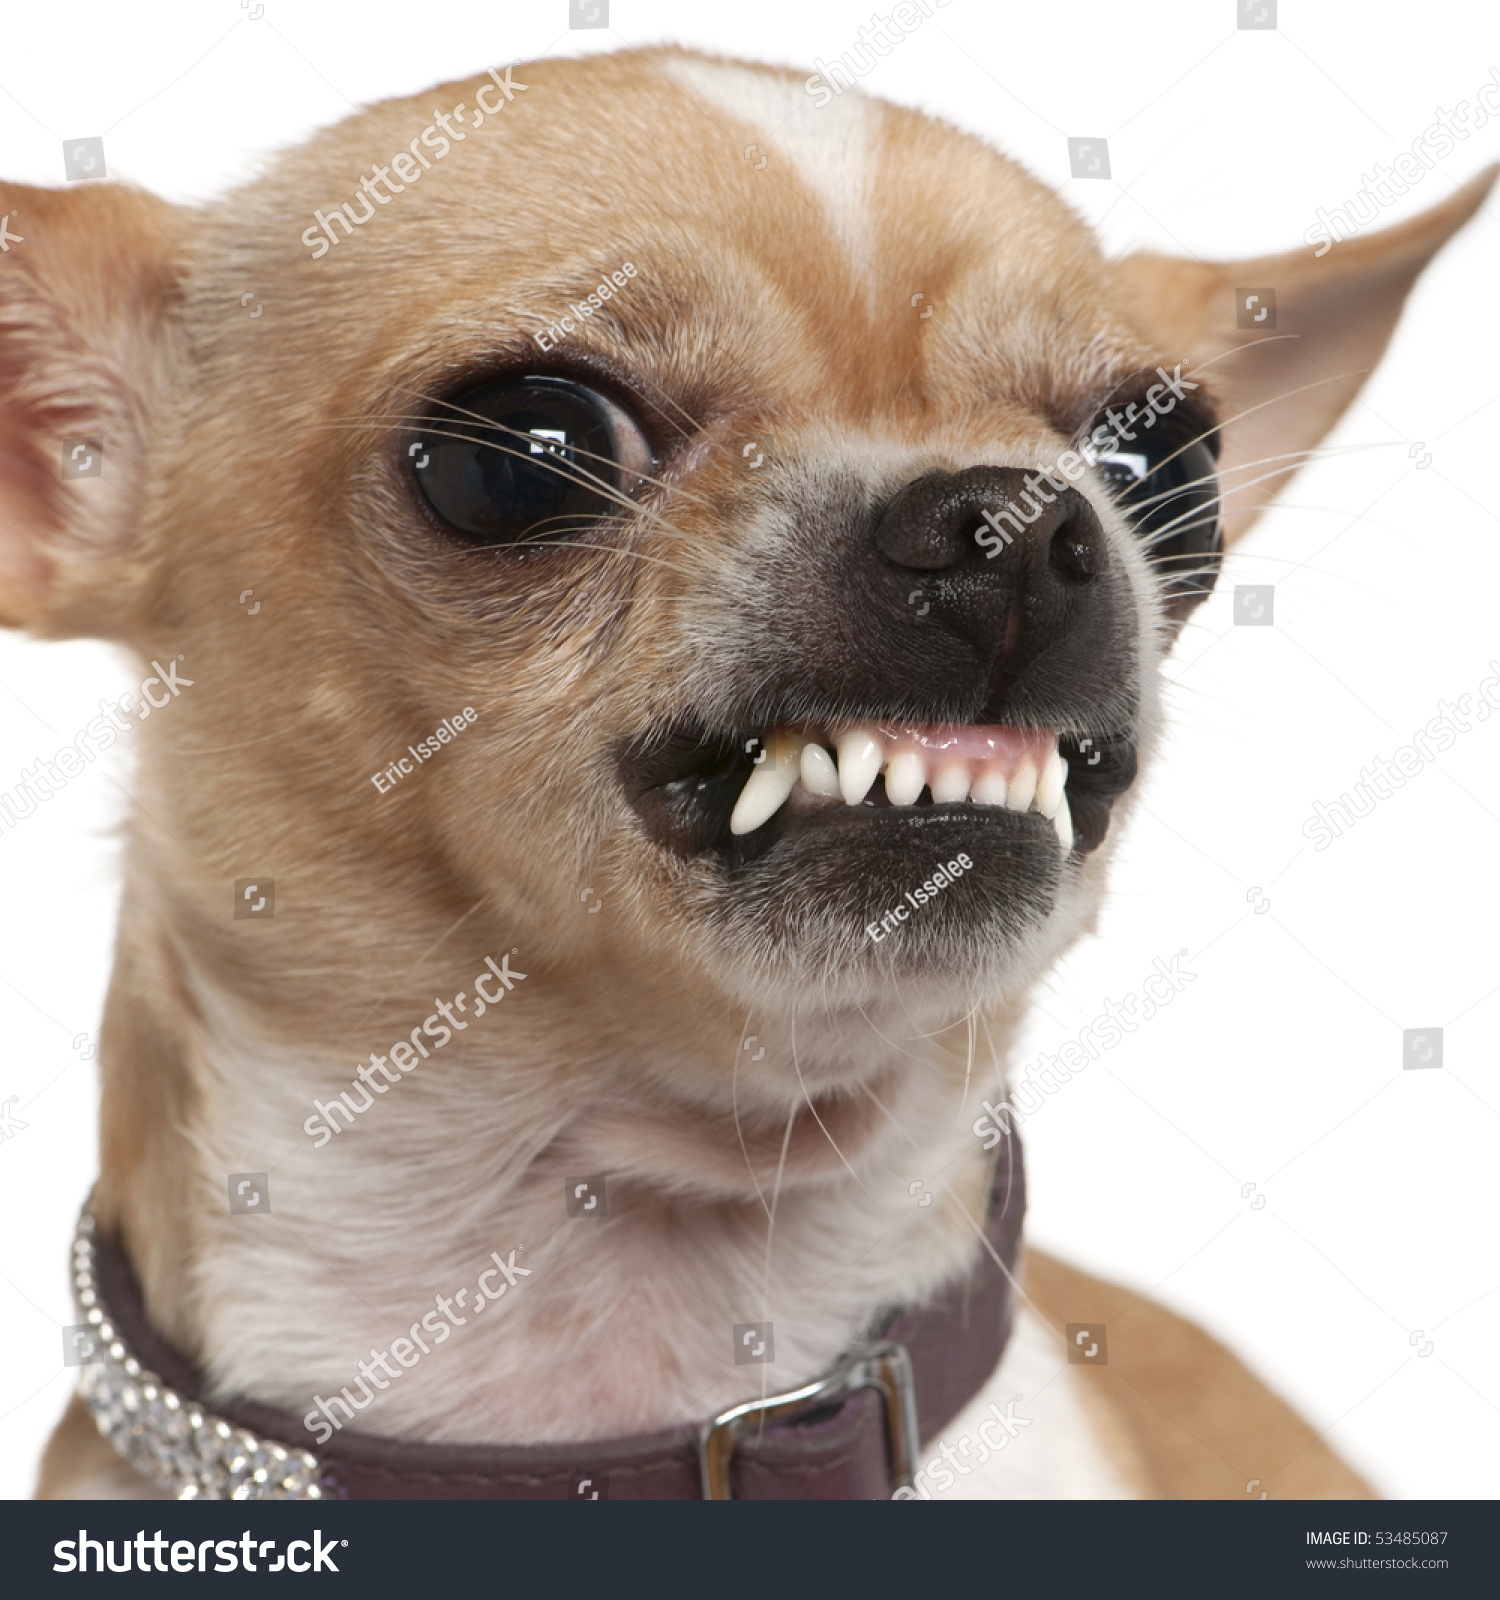 stock-photo-close-up-of-angry-chihuahua-growling-years-old-in-front-of-white-background-53485087.jpg